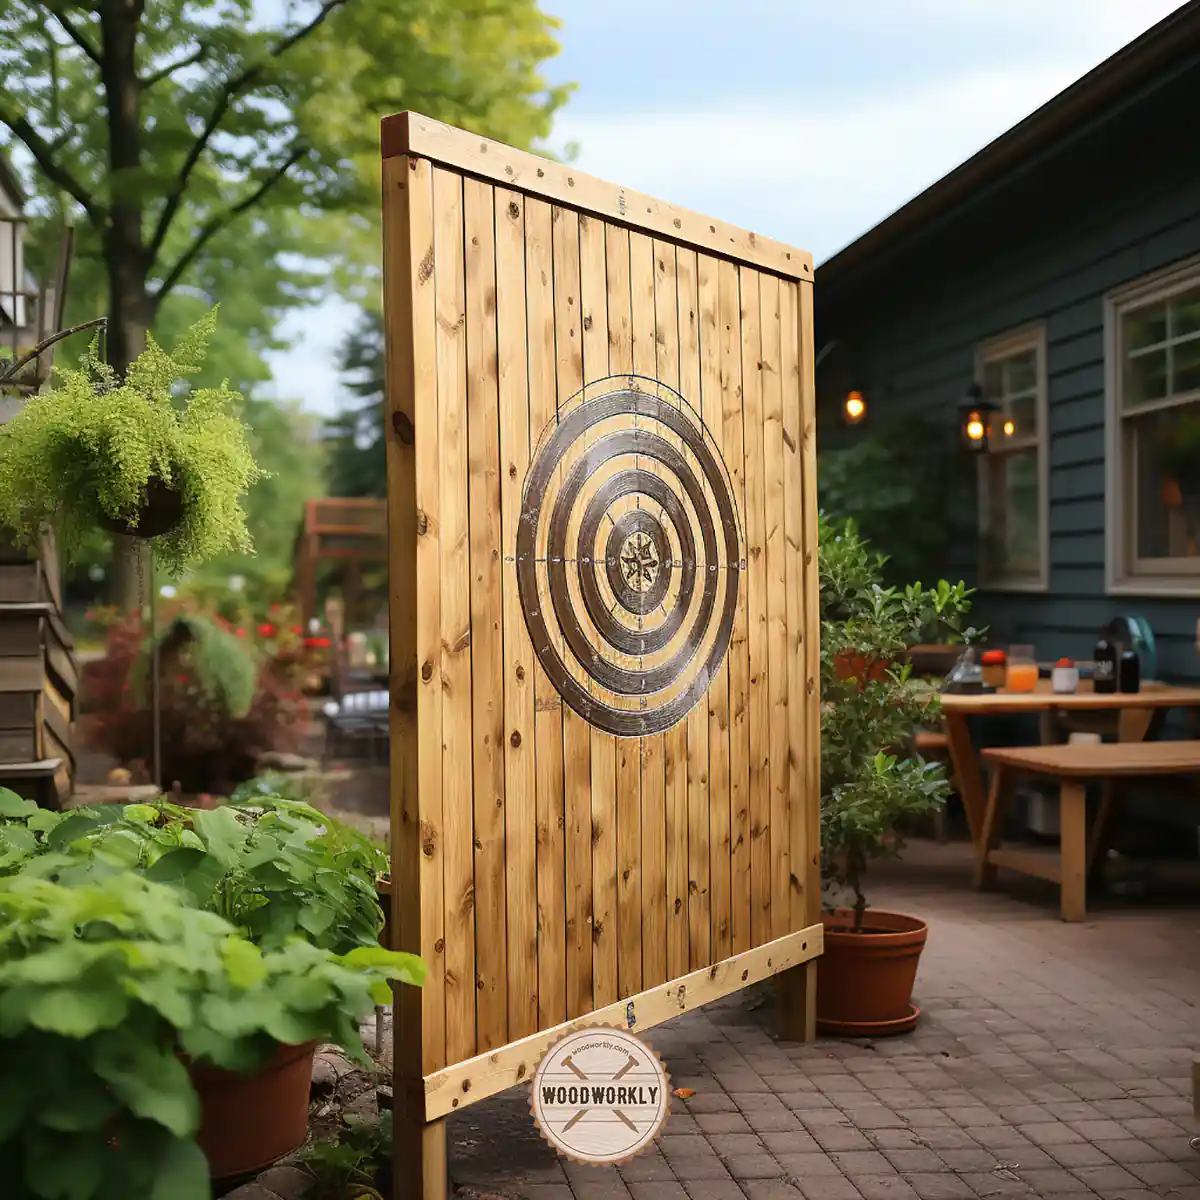 Willow wood axe throwing target board